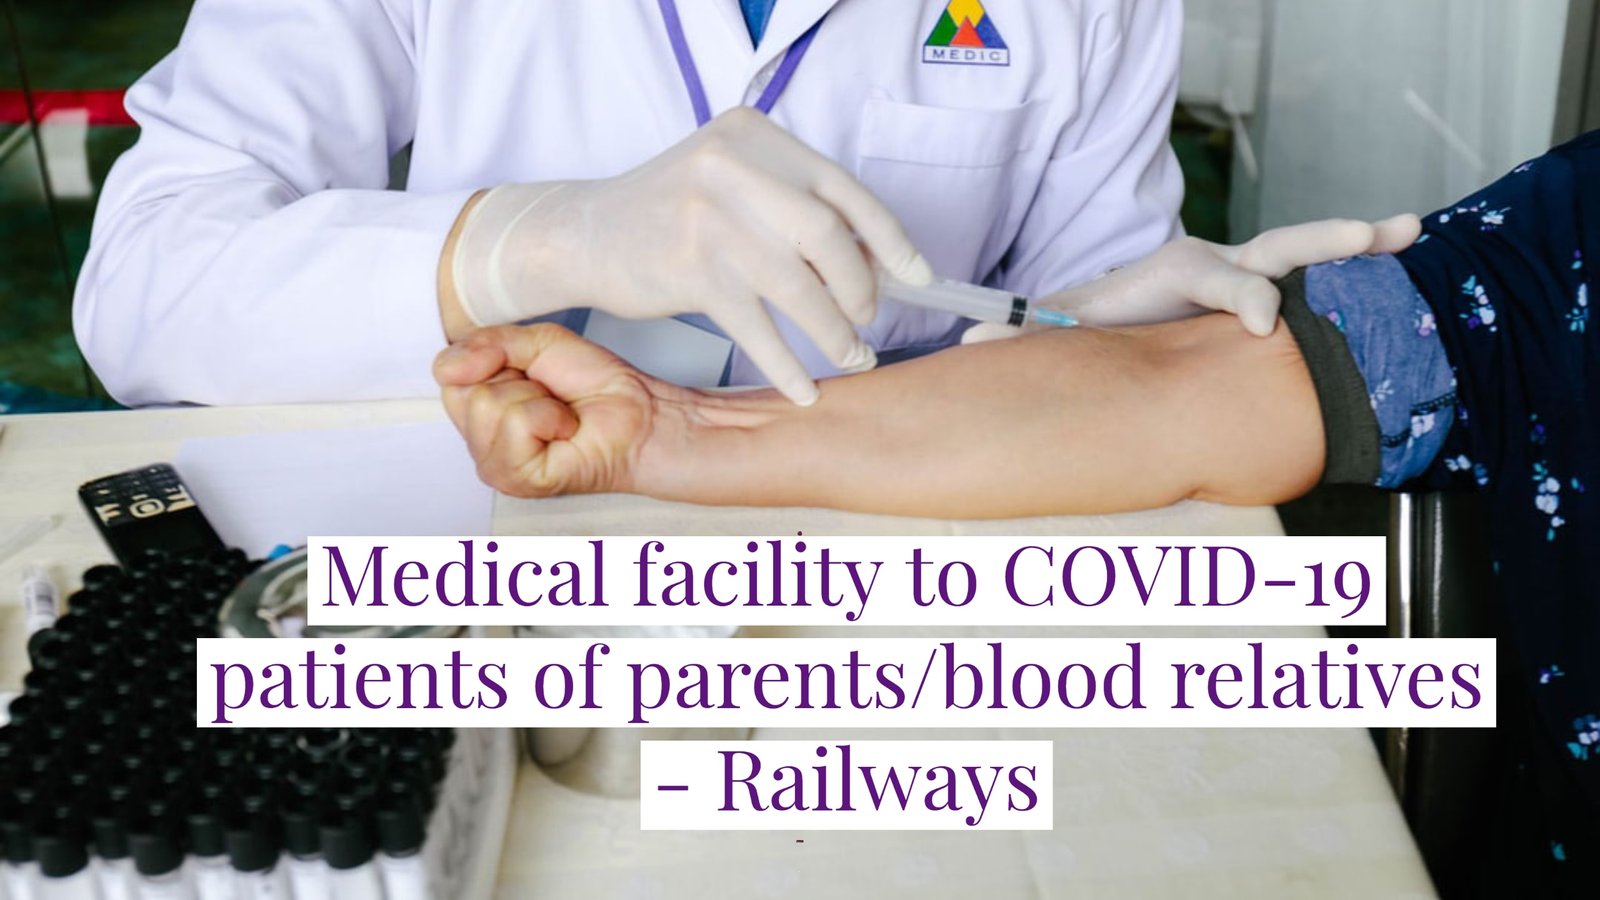 D.O.letter dated 24.07.2020 regarding medical facility to COVID-19 parents/blood relatives of railways employees